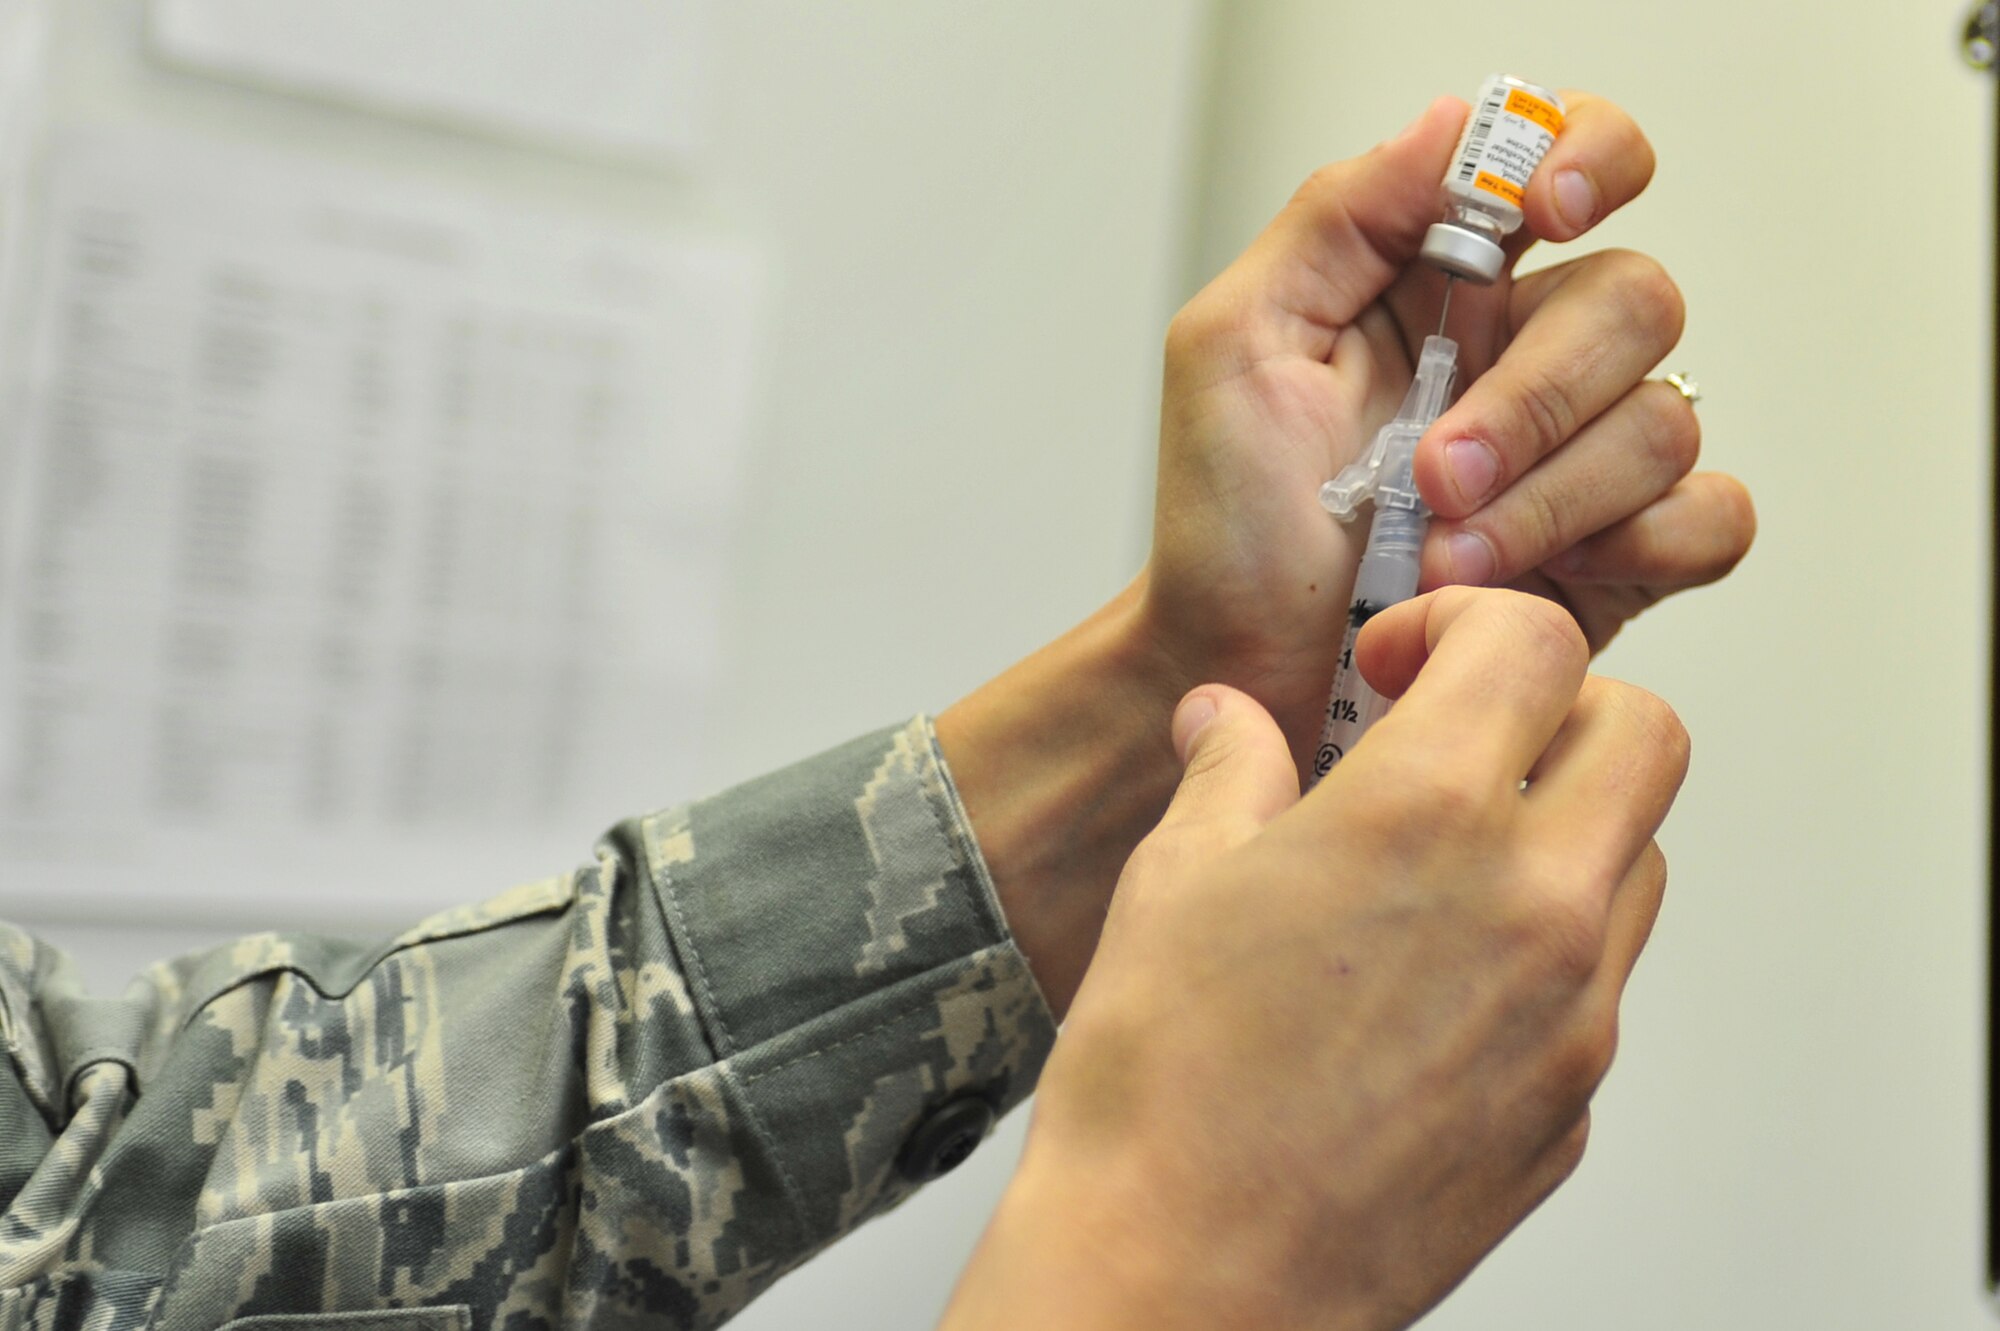 U.S. Air Force Staff Sgt. Dena Levari, 27th Special Operations Medical Operations Squadron NCOIC of immunizations, extracts a prepared Tetanus, Diphtheria, Pertussis vaccination solution with a syringe for a patient in the clinic at Cannon Air Force Base, N.M., May 29, 2012. The Tdap vaccine protects against those viruses that can cause illness like lockjaw and whooping cough. (U.S. Air Force photo by Airman 1st Class Alexxis Pons Abascal)  